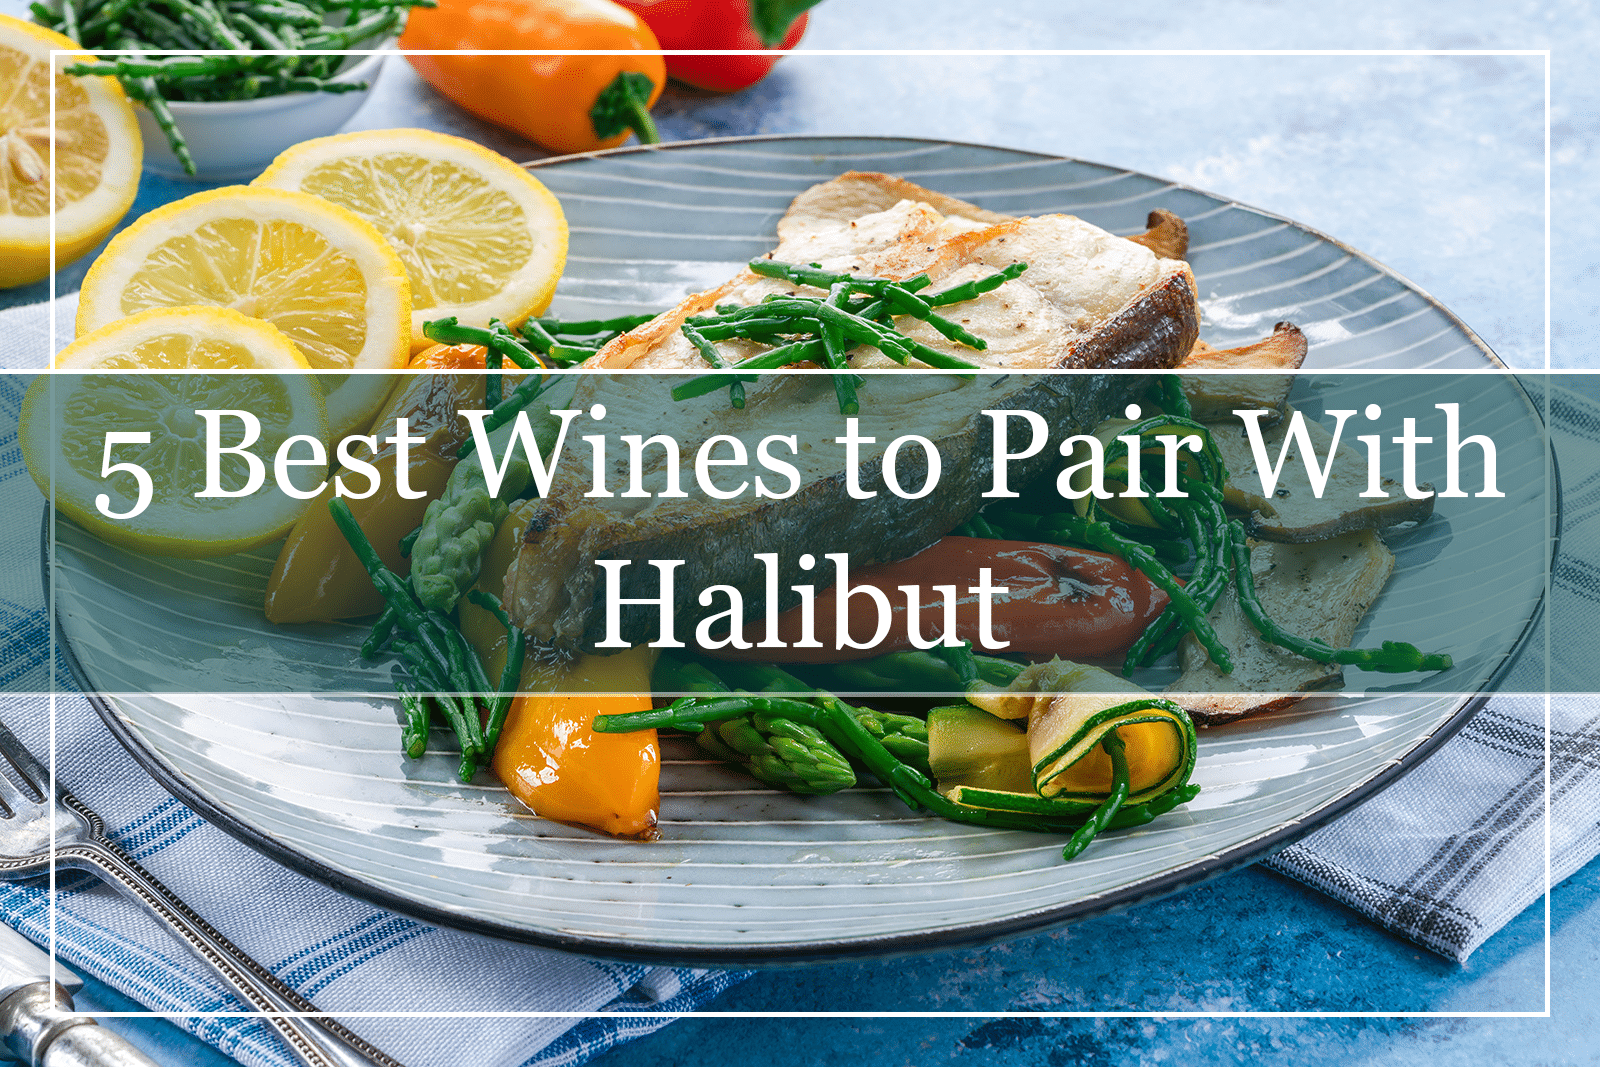 5 Best Wines to Pair With Halibut (2022)